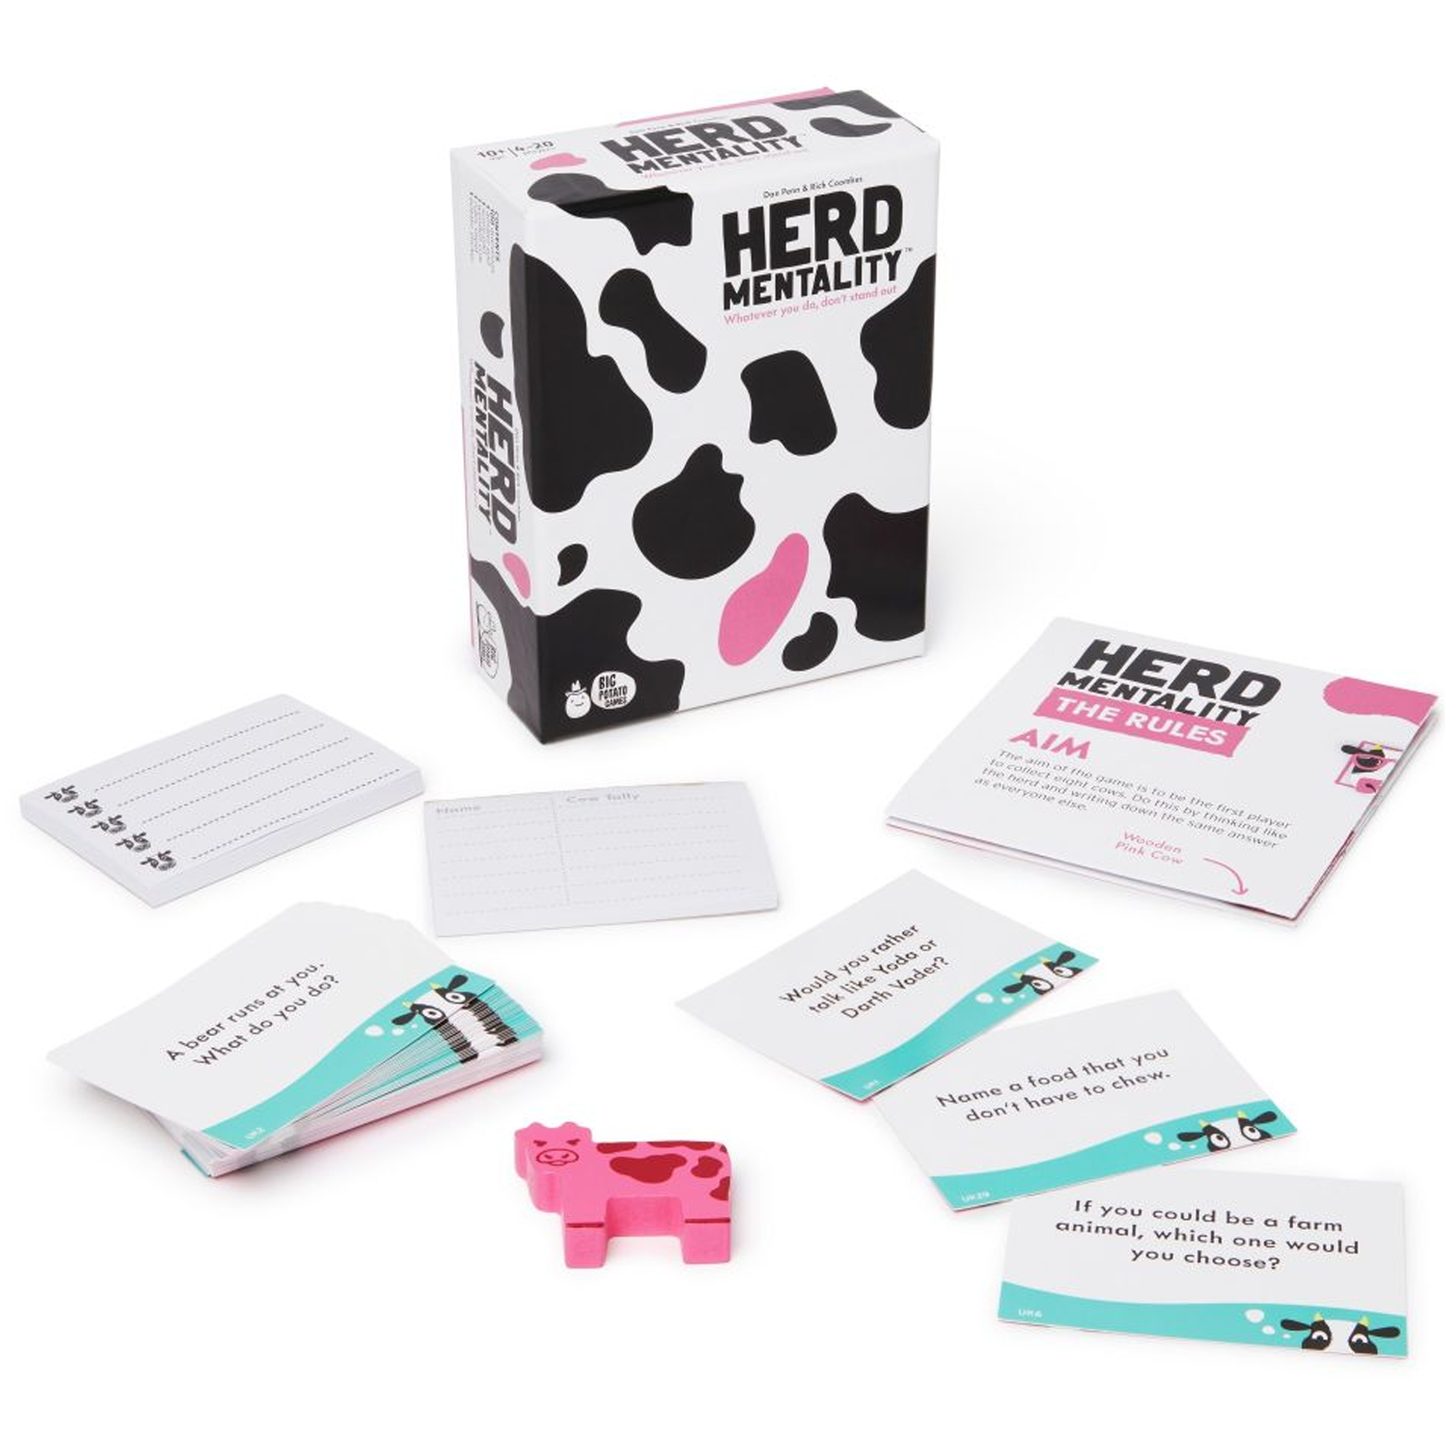 Herd Mentality Mini Party Game Box and Contents | Happy Piranha